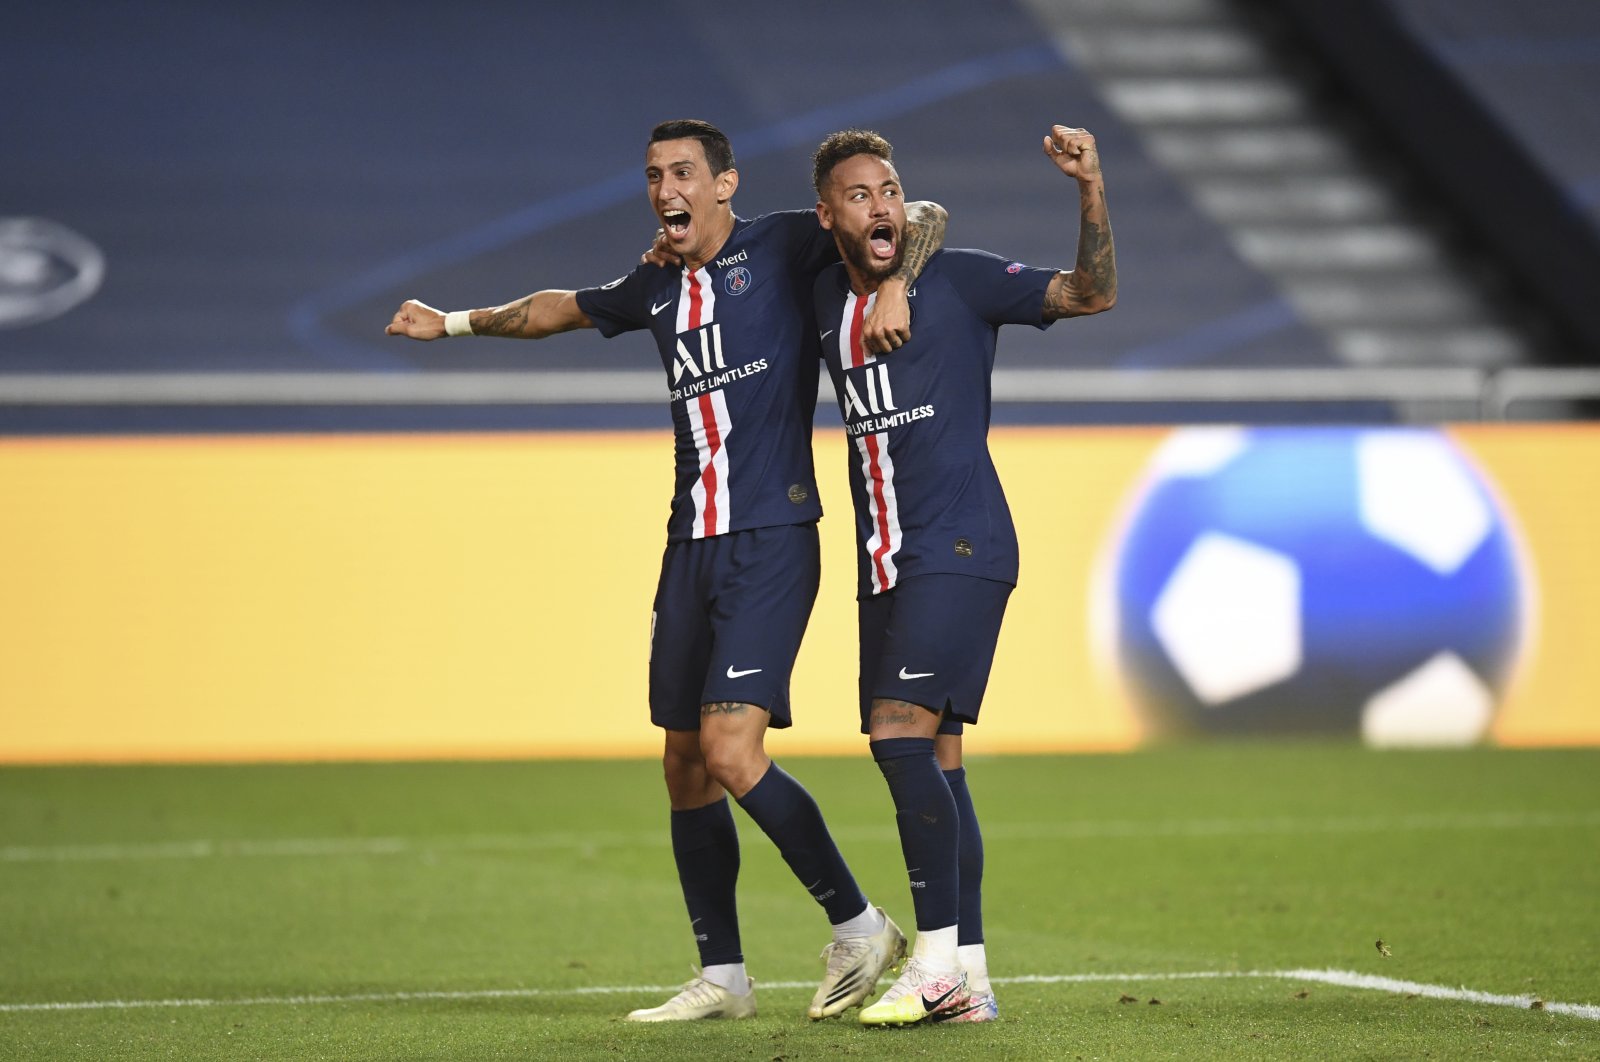 PSG's Angel Di Maria, left, celebrates after scoring his side's second goal with PSG's Neymar during the Champions League semifinal football match between RB Leipzig and Paris Saint-Germain at the Luz stadium in Lisbon, Portugal, Tuesday, Aug. 18, 2020. (Pool Photo via AP)